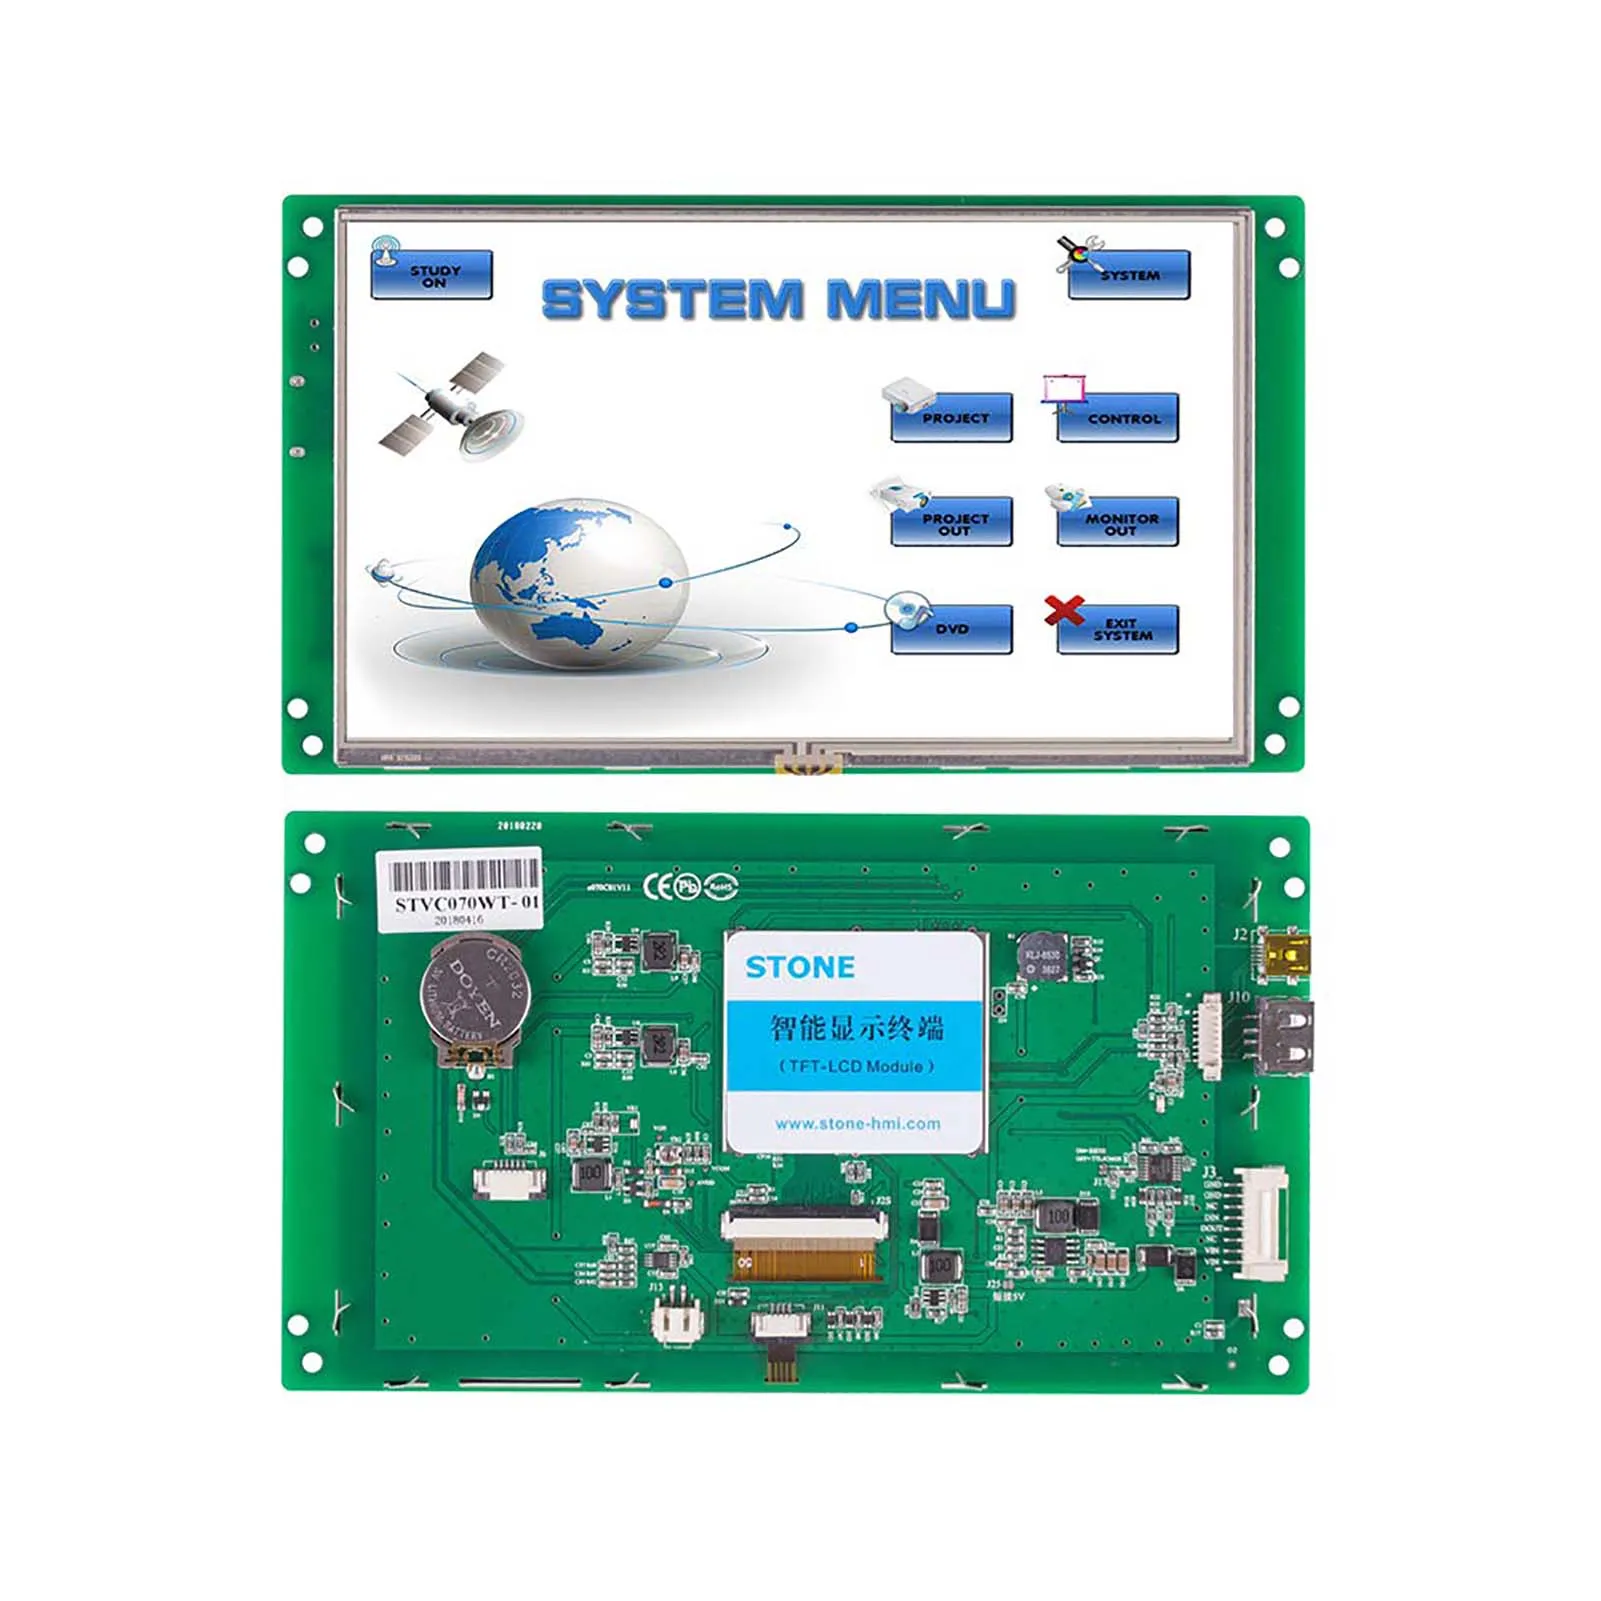 Stone Smart TFT LCD 7 Inch Display Modules HMI Touch Screen with Software + Serial Interface + Controller Panel